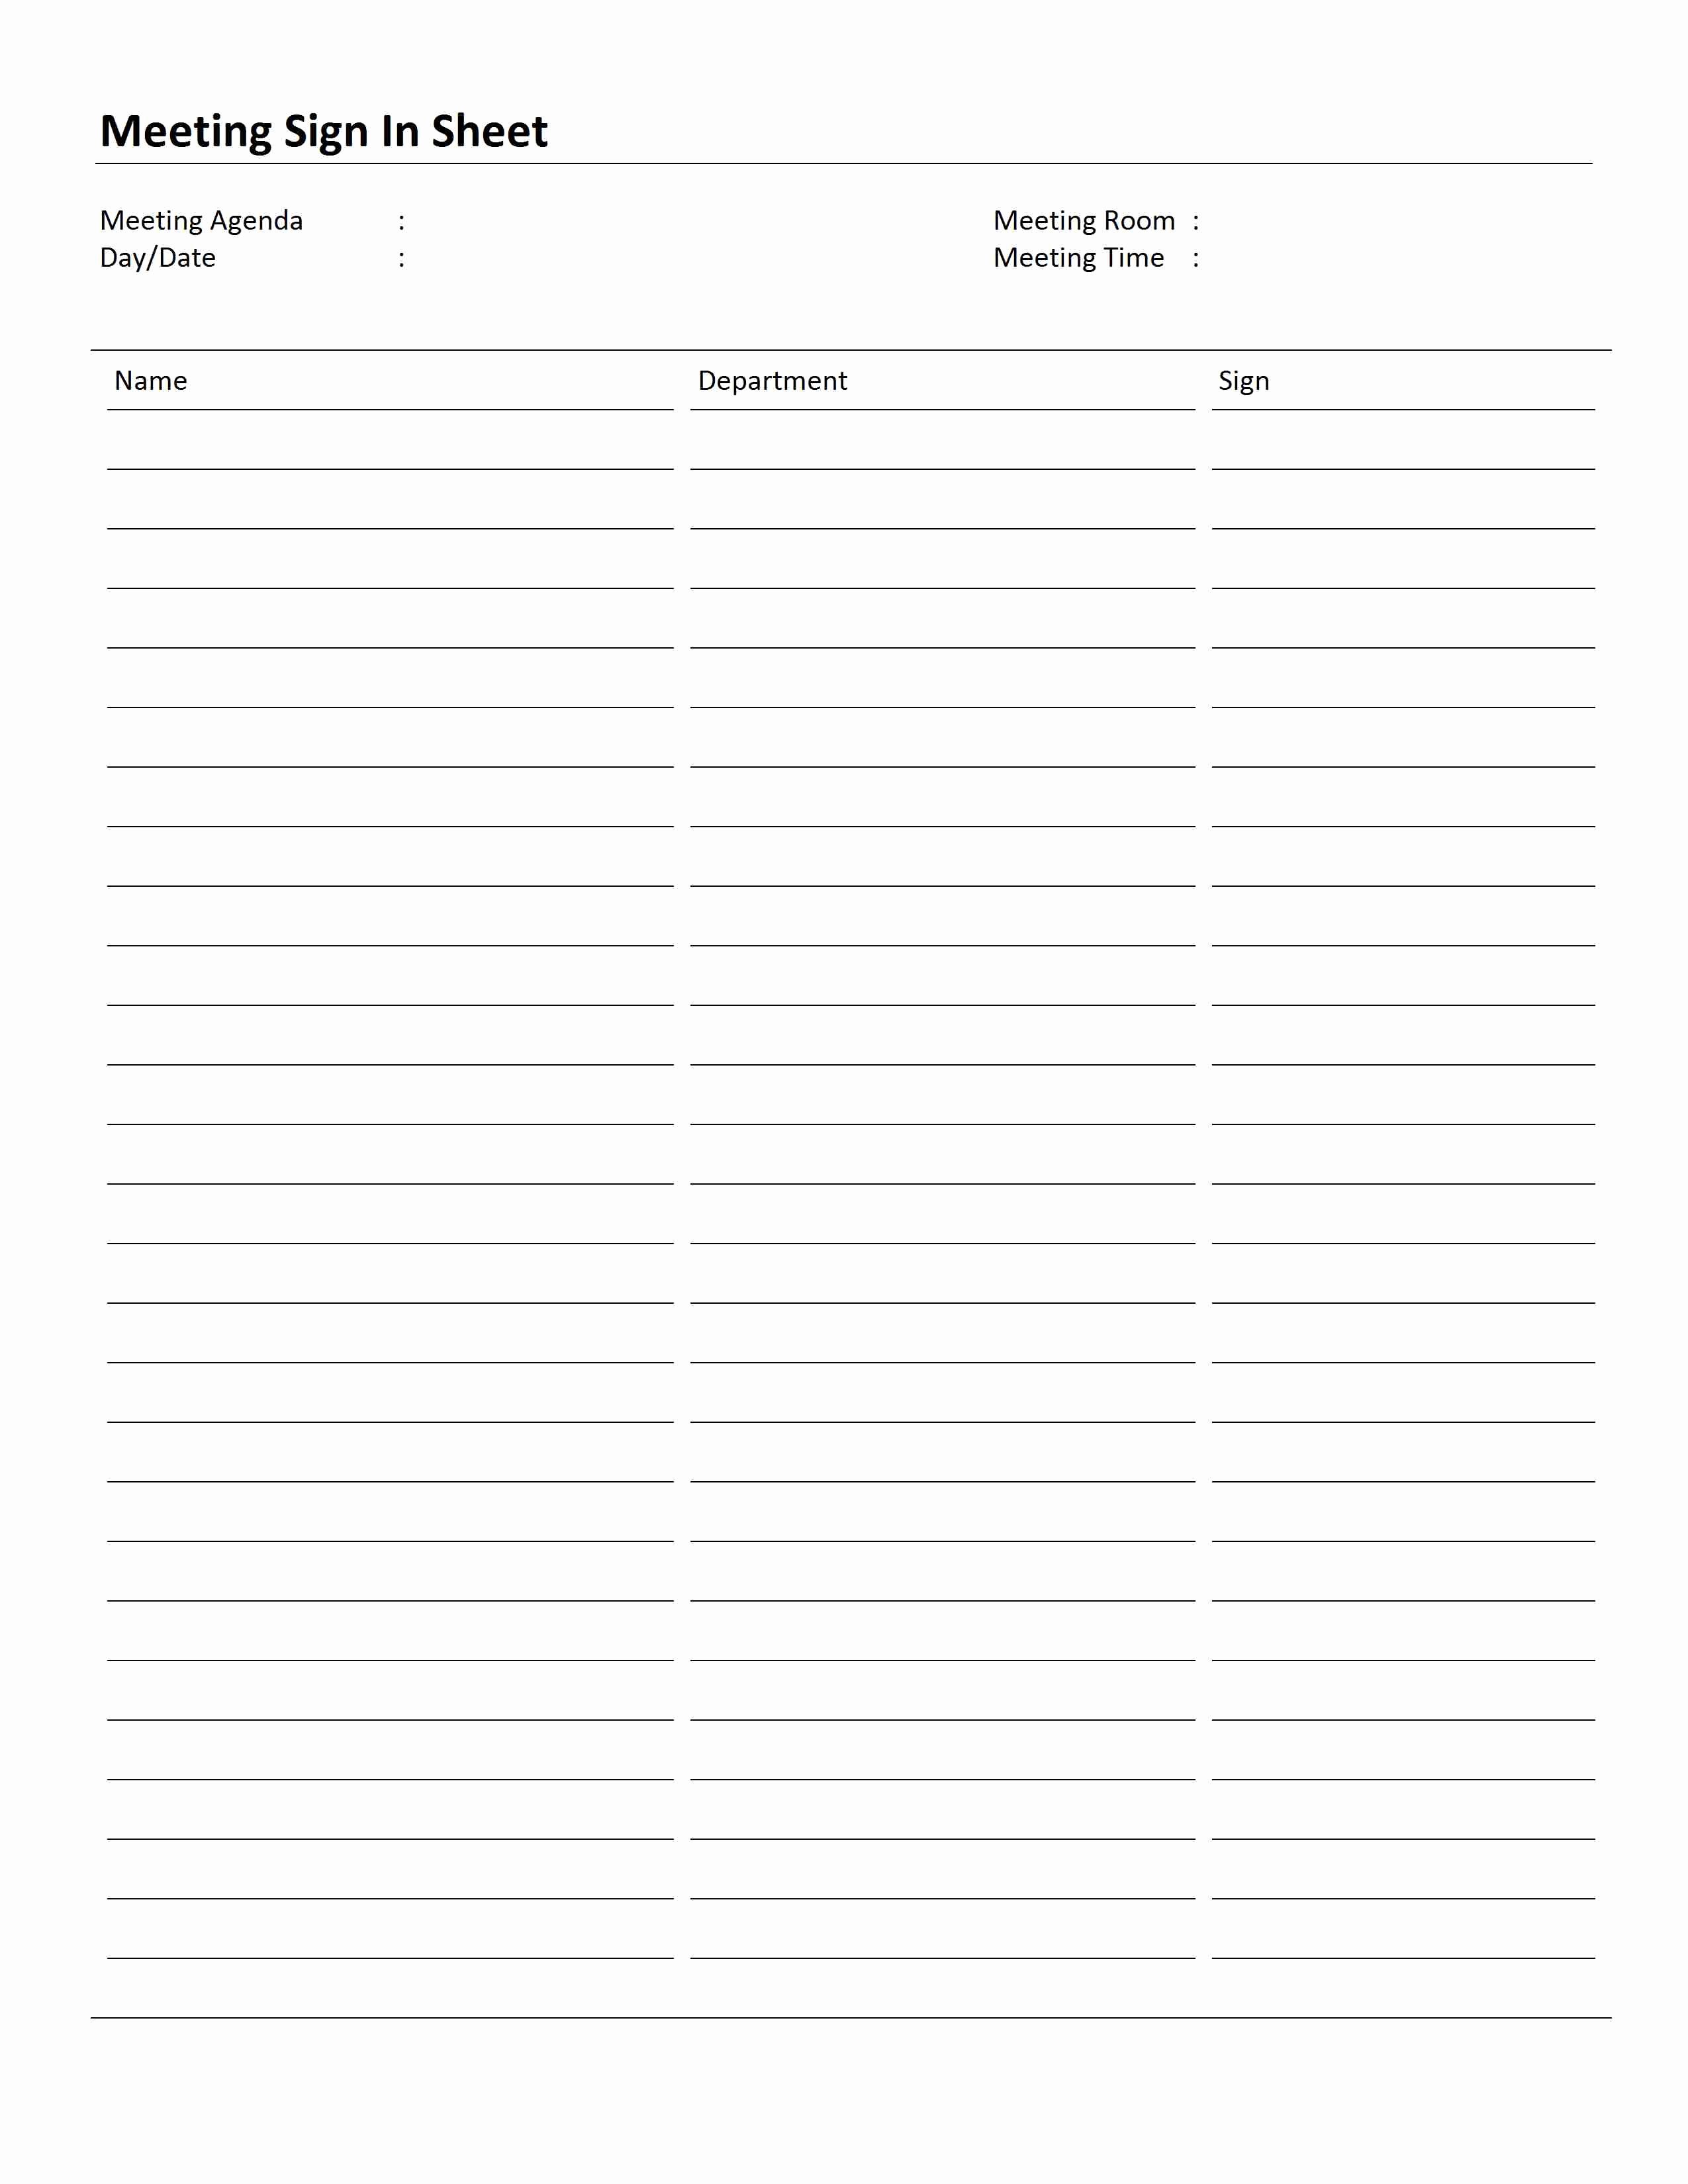 Meeting Sign Up Sheet Template Beautiful Sign In Archives